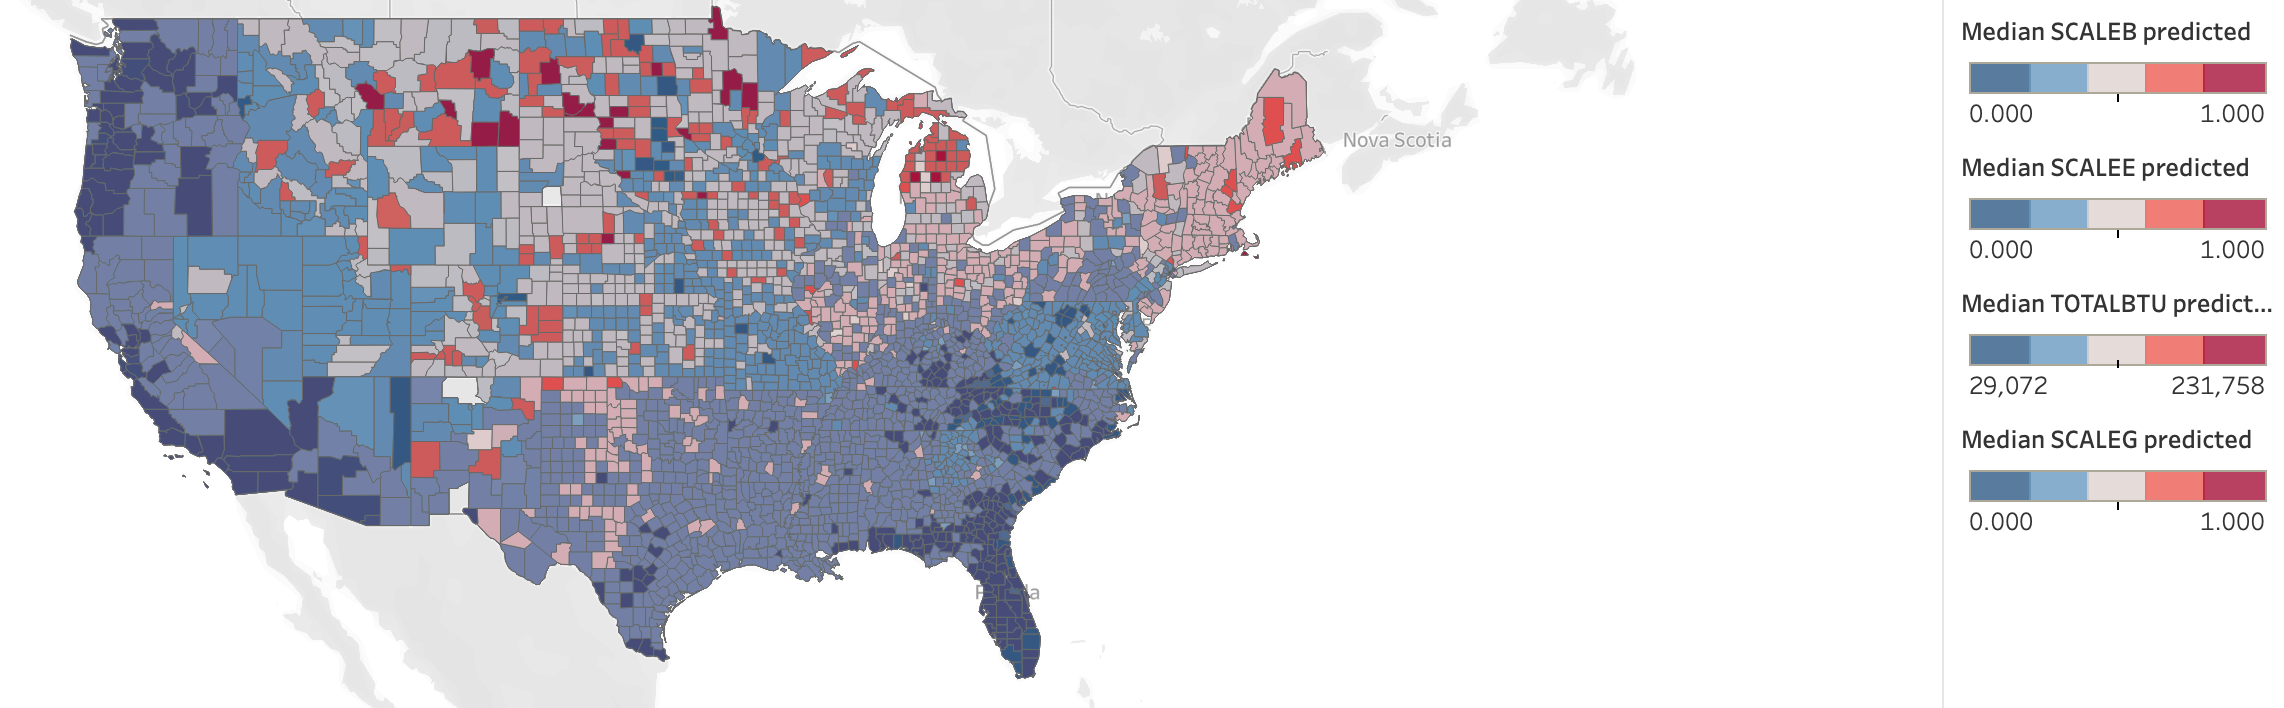 A map of the contiguous United States divided by county including media SCALEB predictions.